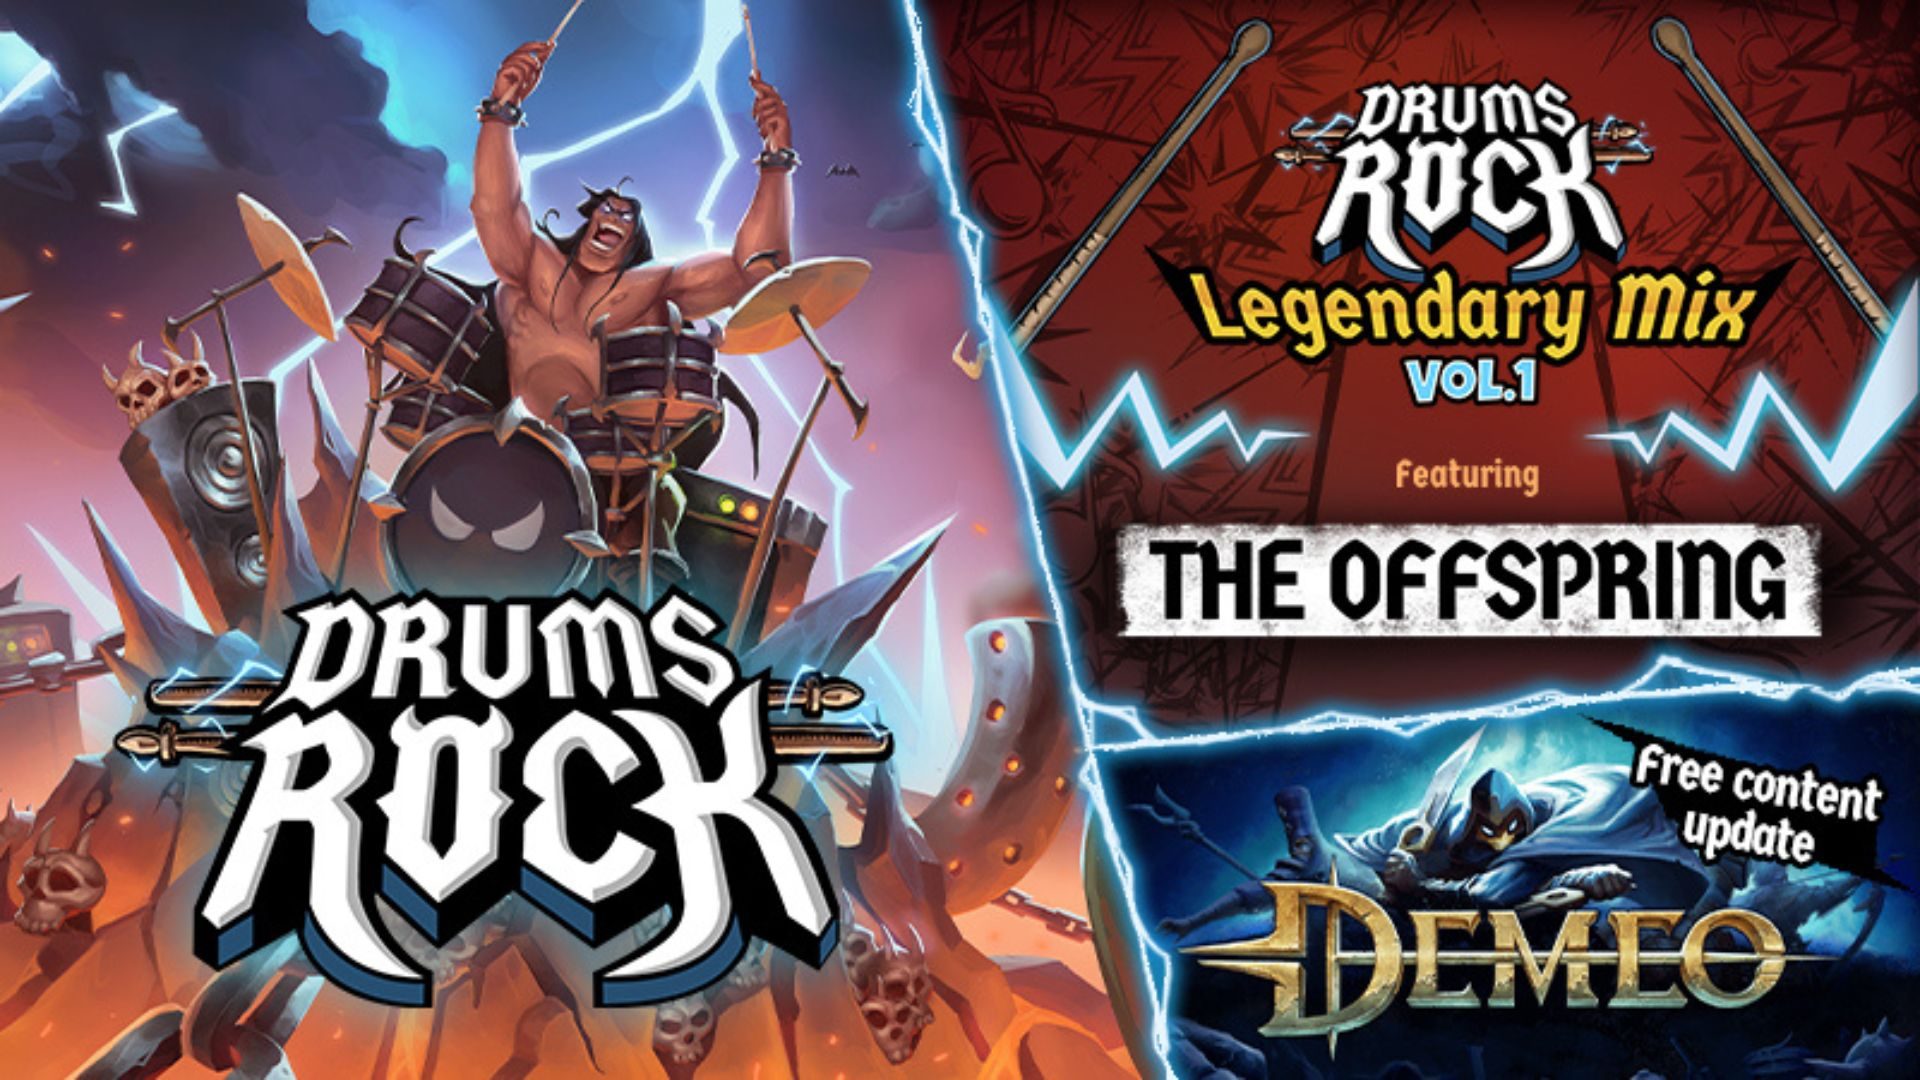 The Drums Rock DLC Legendary Mix Vol I featuring The Offspring is now available – PlayStation.Blog